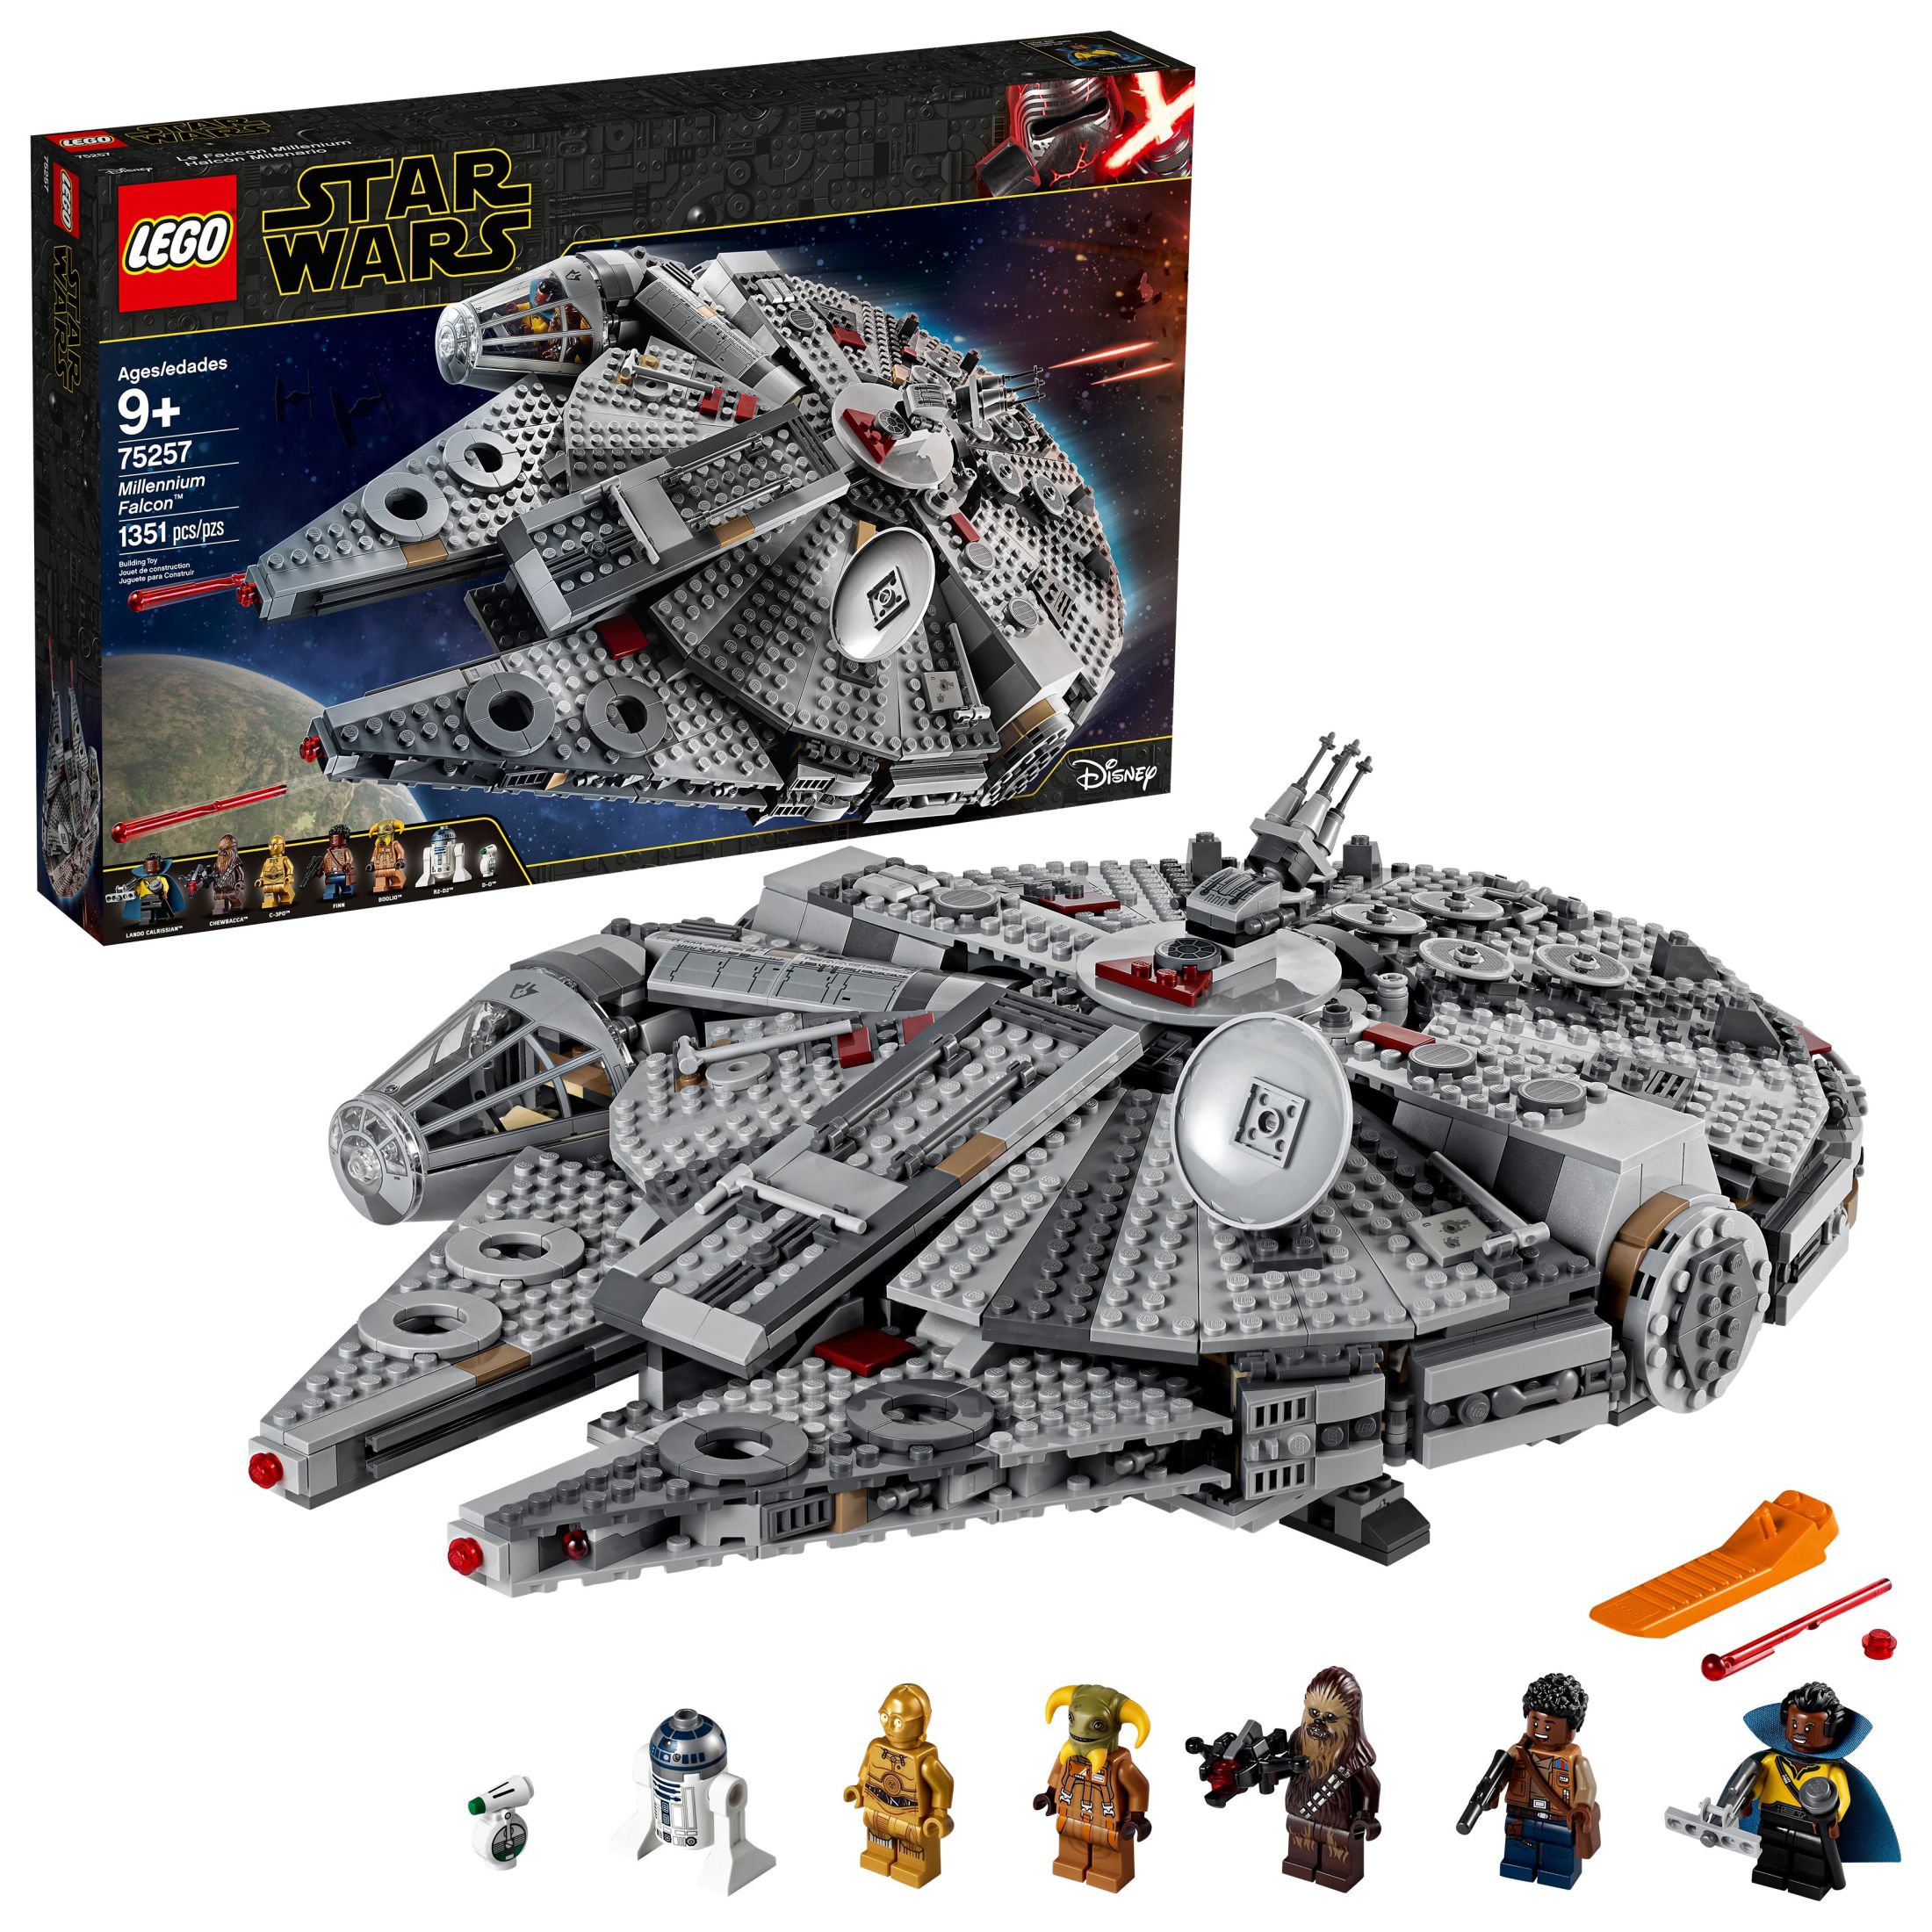 LEGO Star Wars Millennium Falcon 75257 Building Set - Starship Model with Finn, Chewbacca, Lando Calrissian, Boolio, C-3PO, R2-D2, and D-O Minifigures, The Rise of Skywalker Movie Collection - image 1 of 9